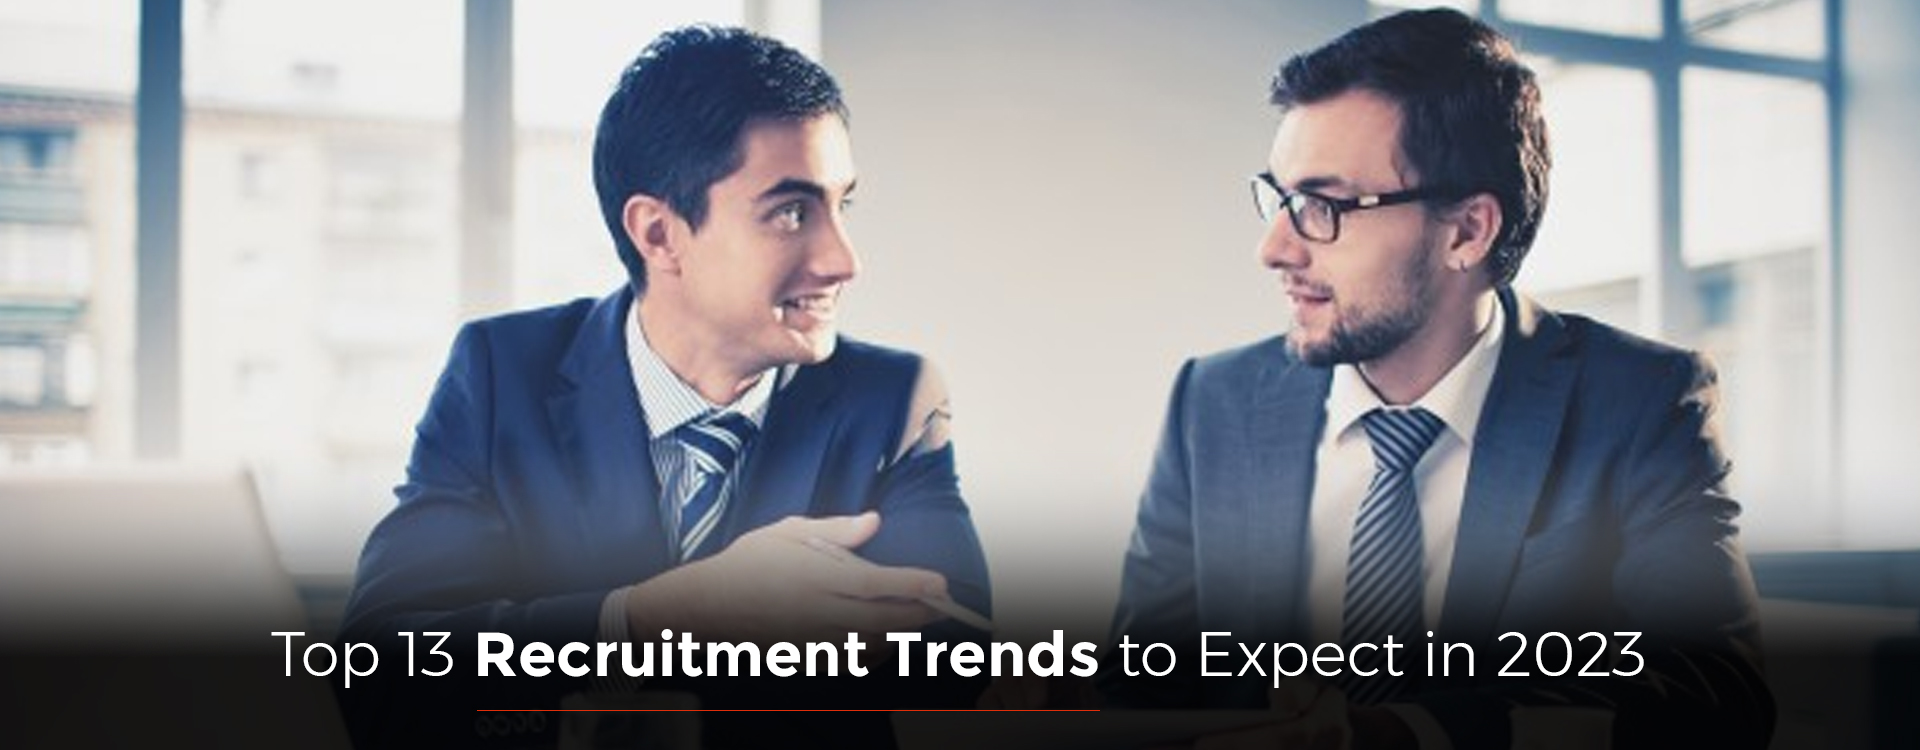 Top 13 Recruitment Trends to Expect in 2023 – Shrofile